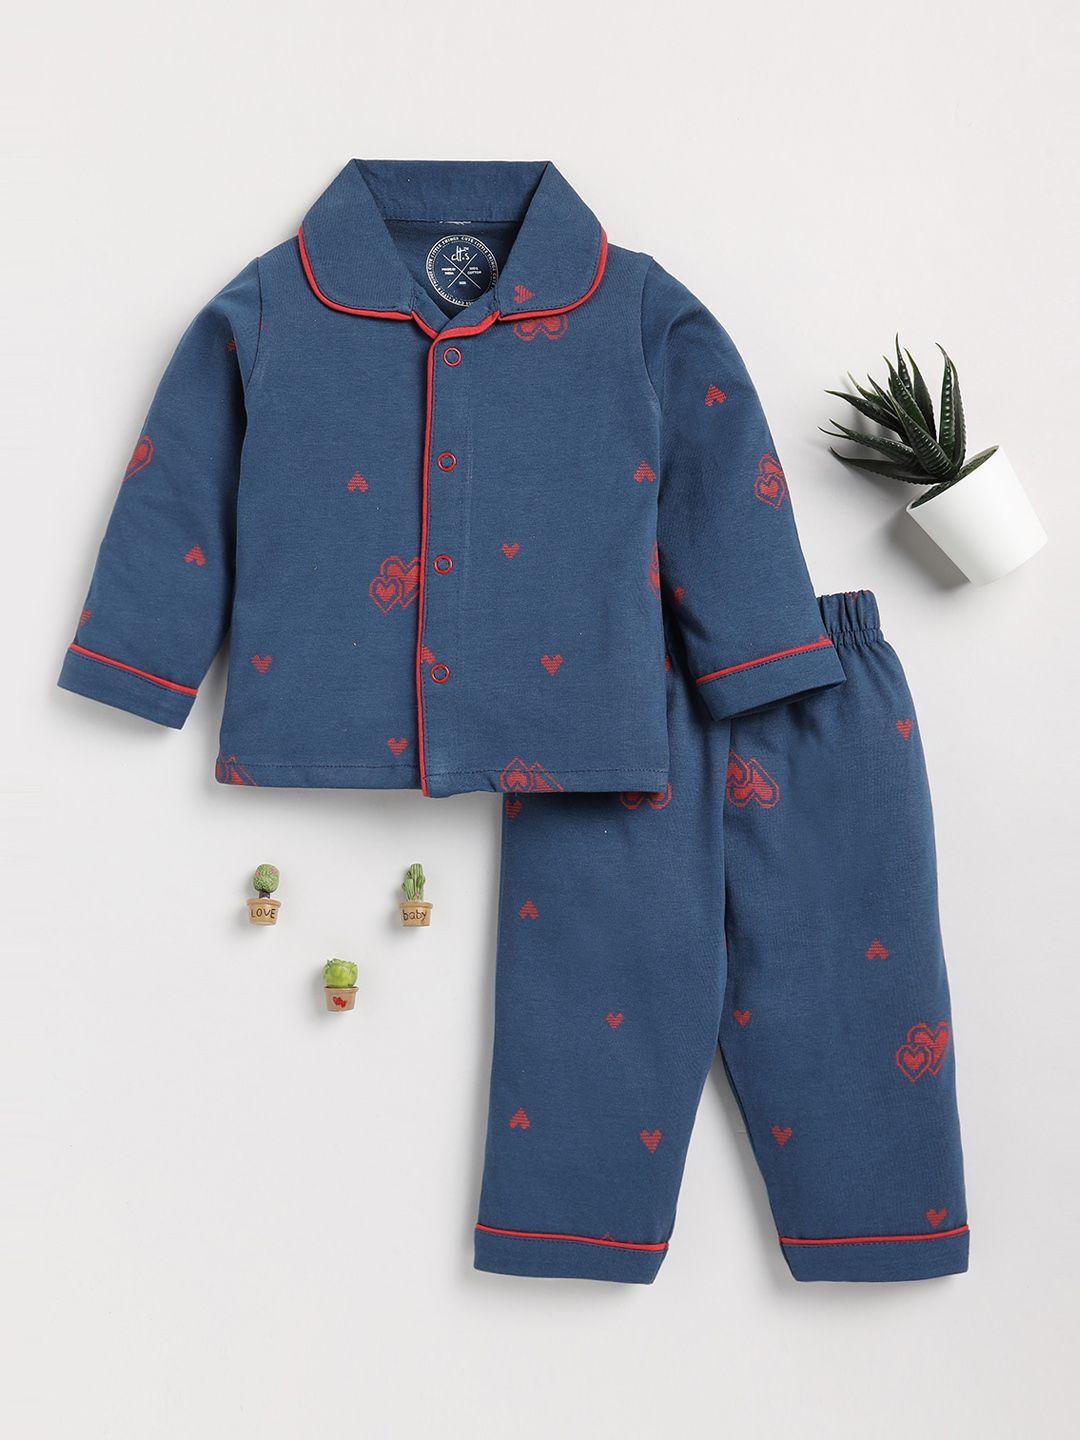 clt-s-unisex-kids-blue-&-red-printed-night-suit